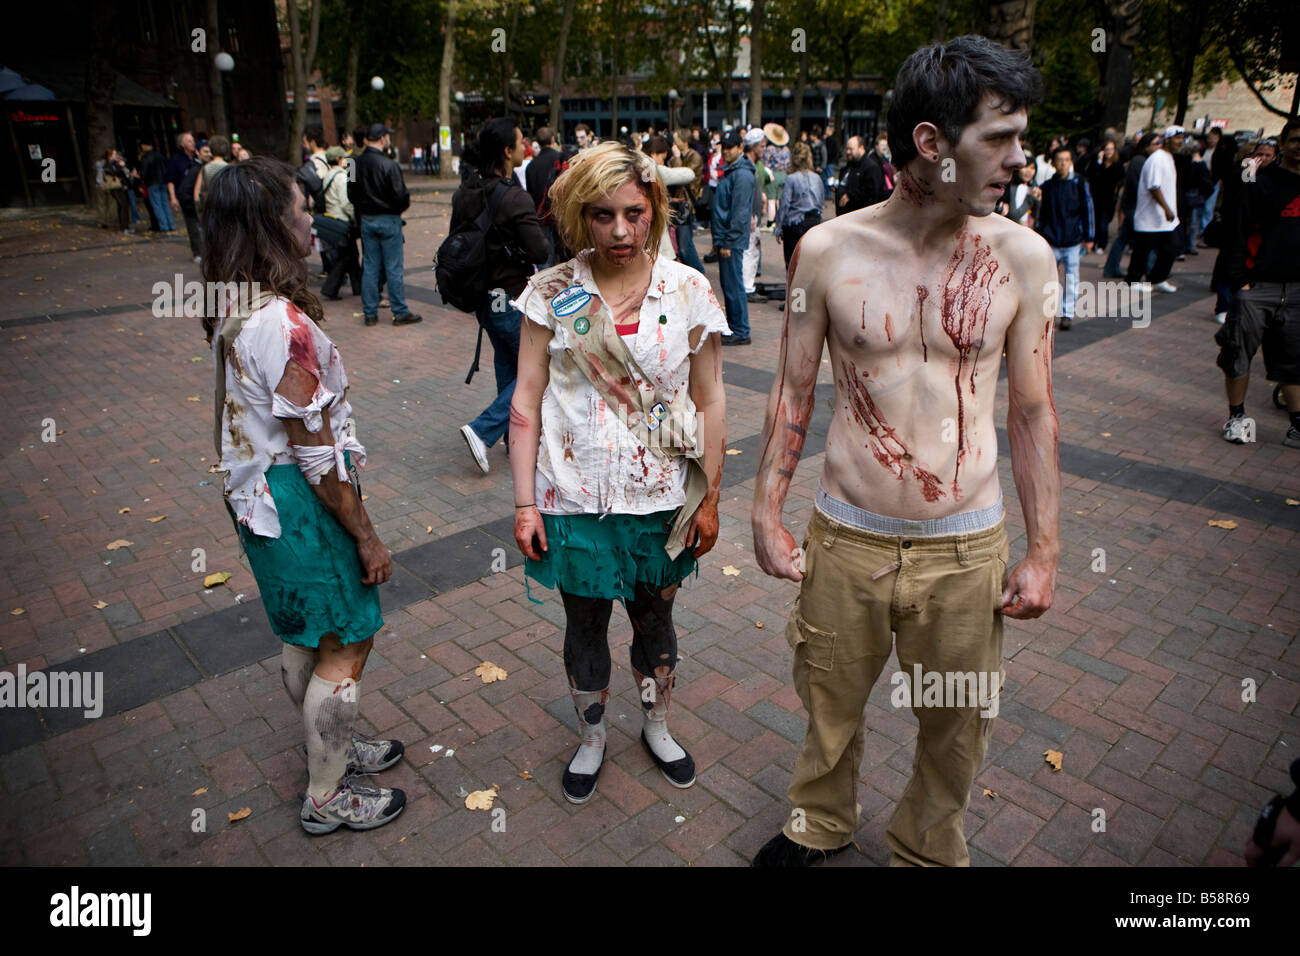 On 25th anniversary of Jackson's Thriller video, Seattle Zombies gather in Occidental Park to host a Thriller dance event. Stock Photo